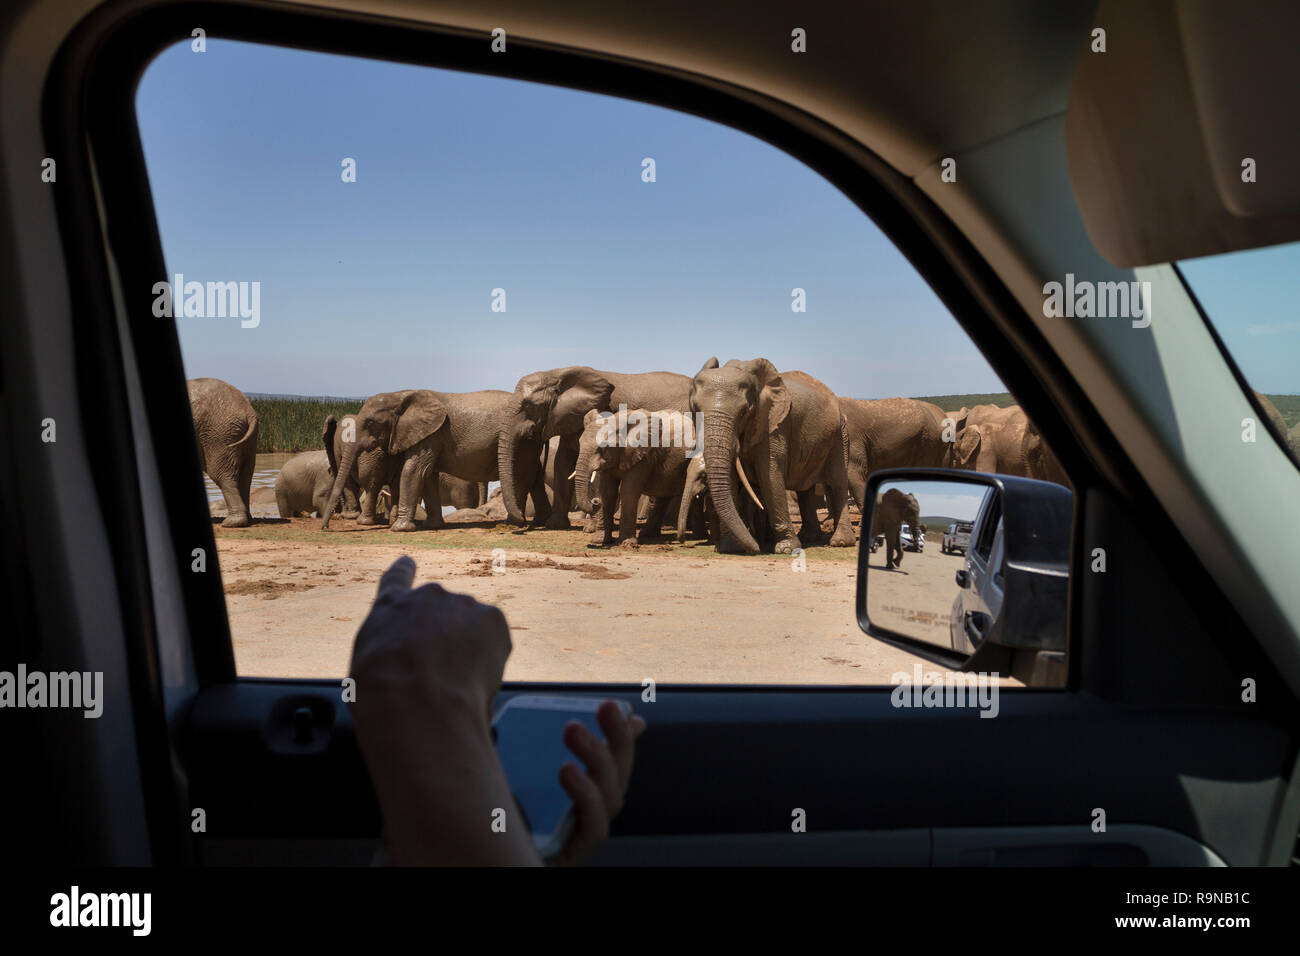 On a safari game drive at Addo Elephant National Park, South Africa. Watching a herd of elephants at Hapoor waterhole from inside the car. Stock Photo